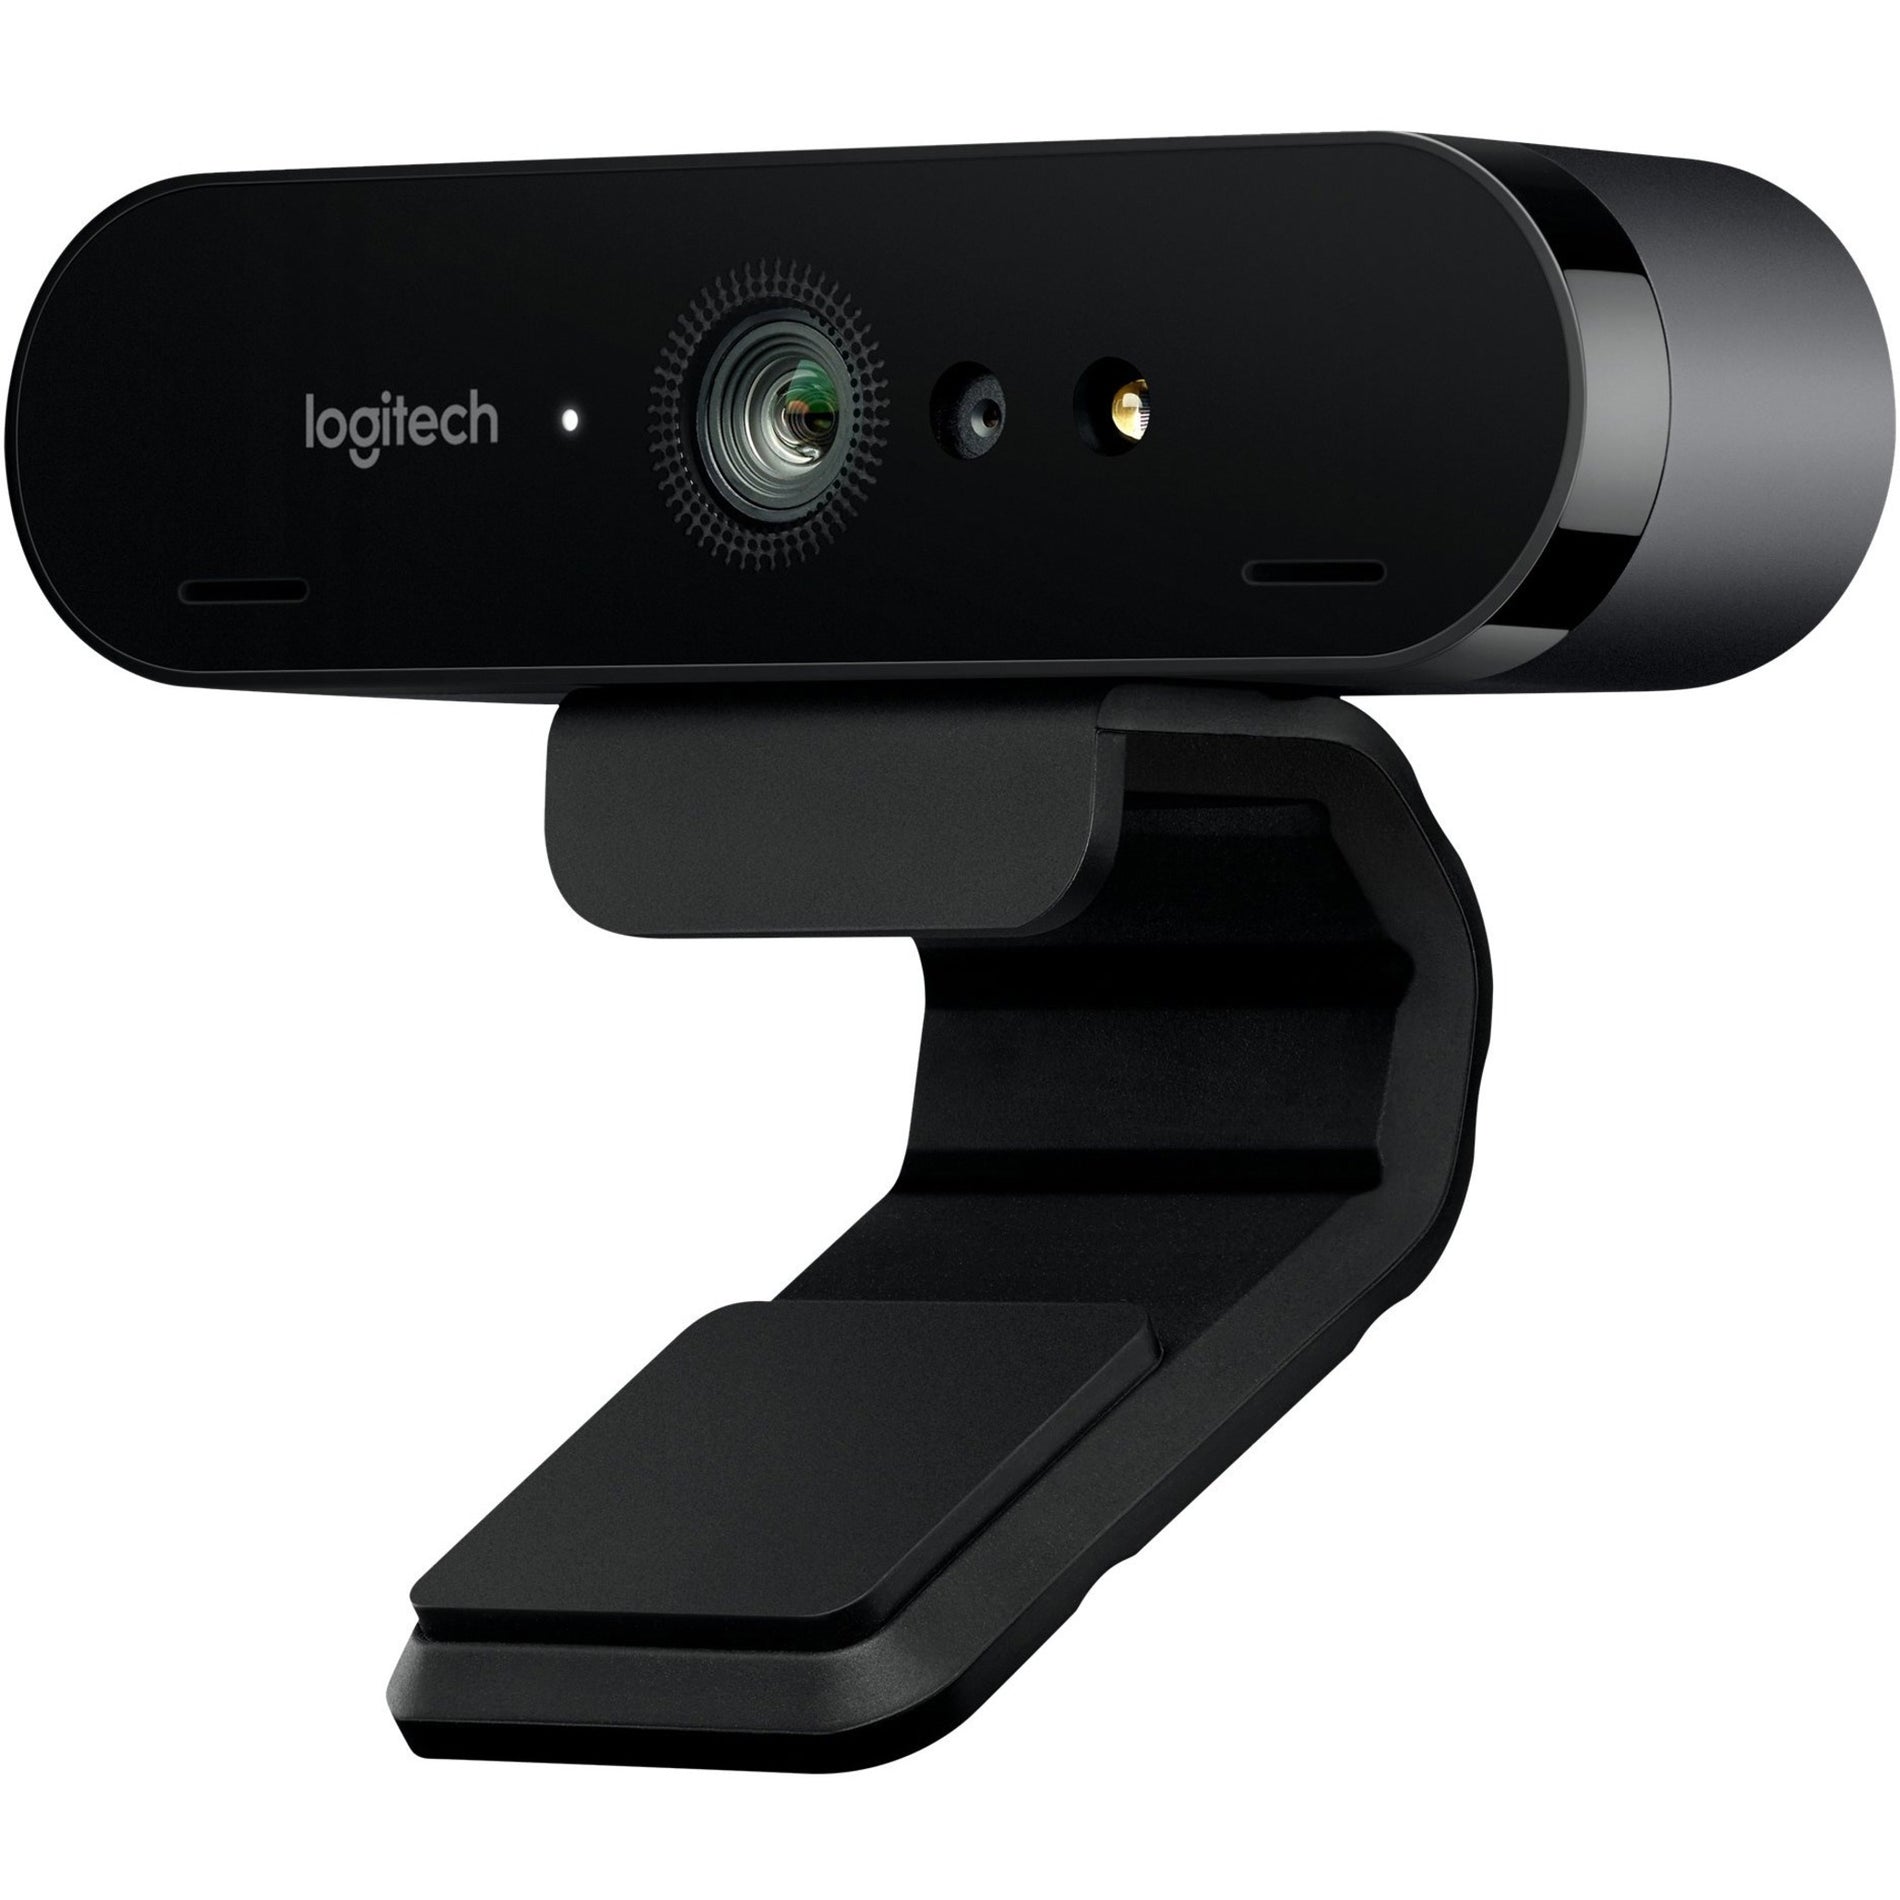 Logitech 960-001105 BRIO 4K Ultra HD Webcam with RightLight 3 with HDR, 90 fps, USB 3.0